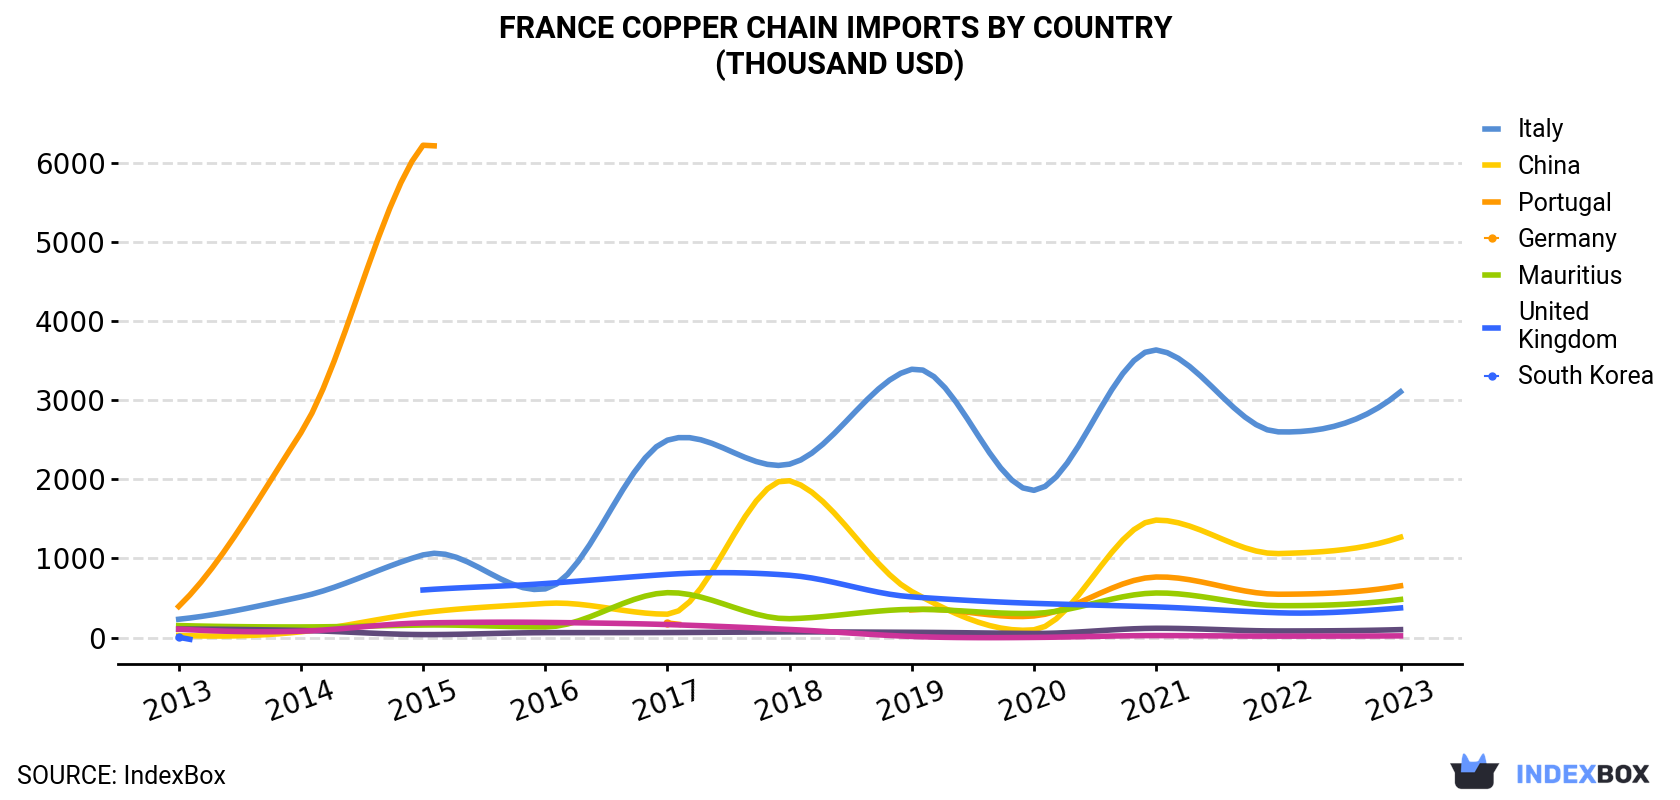 France Copper Chain Imports By Country (Thousand USD)